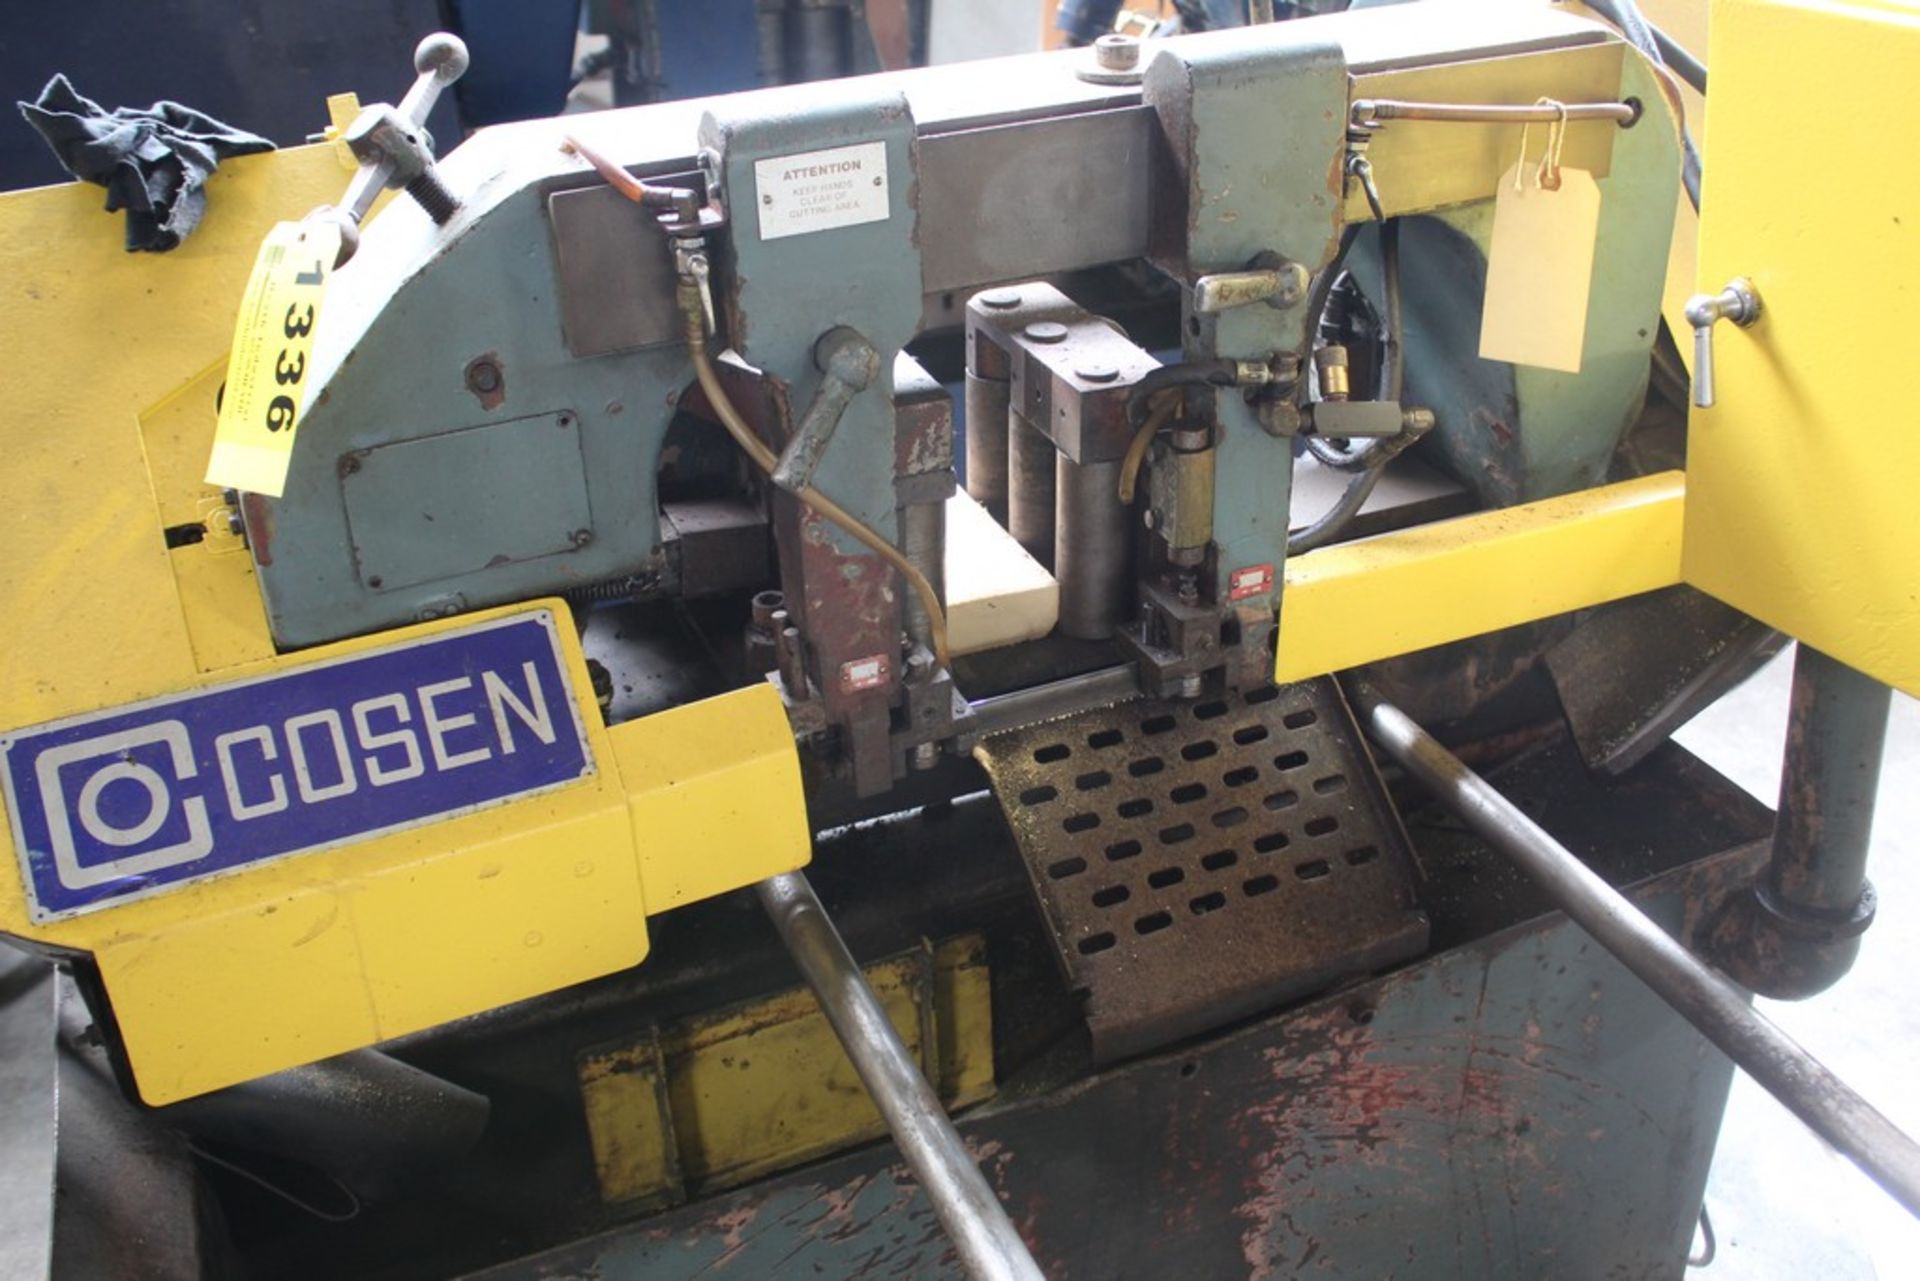 10" X 10" COSEN AUTOMATIC HORIZONTAL BAND SAW, S/N C190821 (1981) MODEL AH250, EQUIPPED WITH VISE, - Image 2 of 4